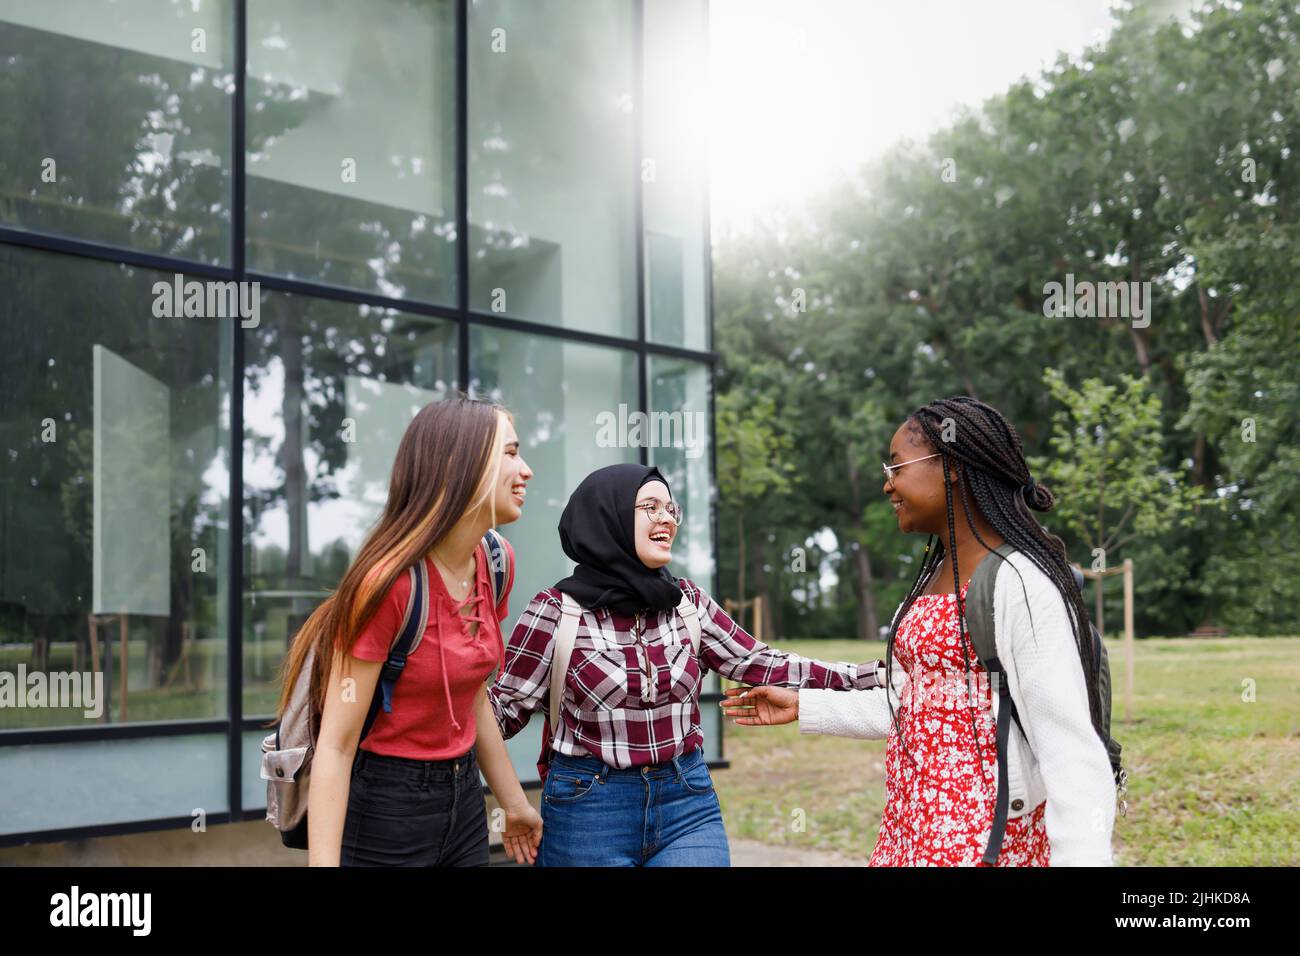 Three friends hanging out and enjoying their day at the campus Stock Photo